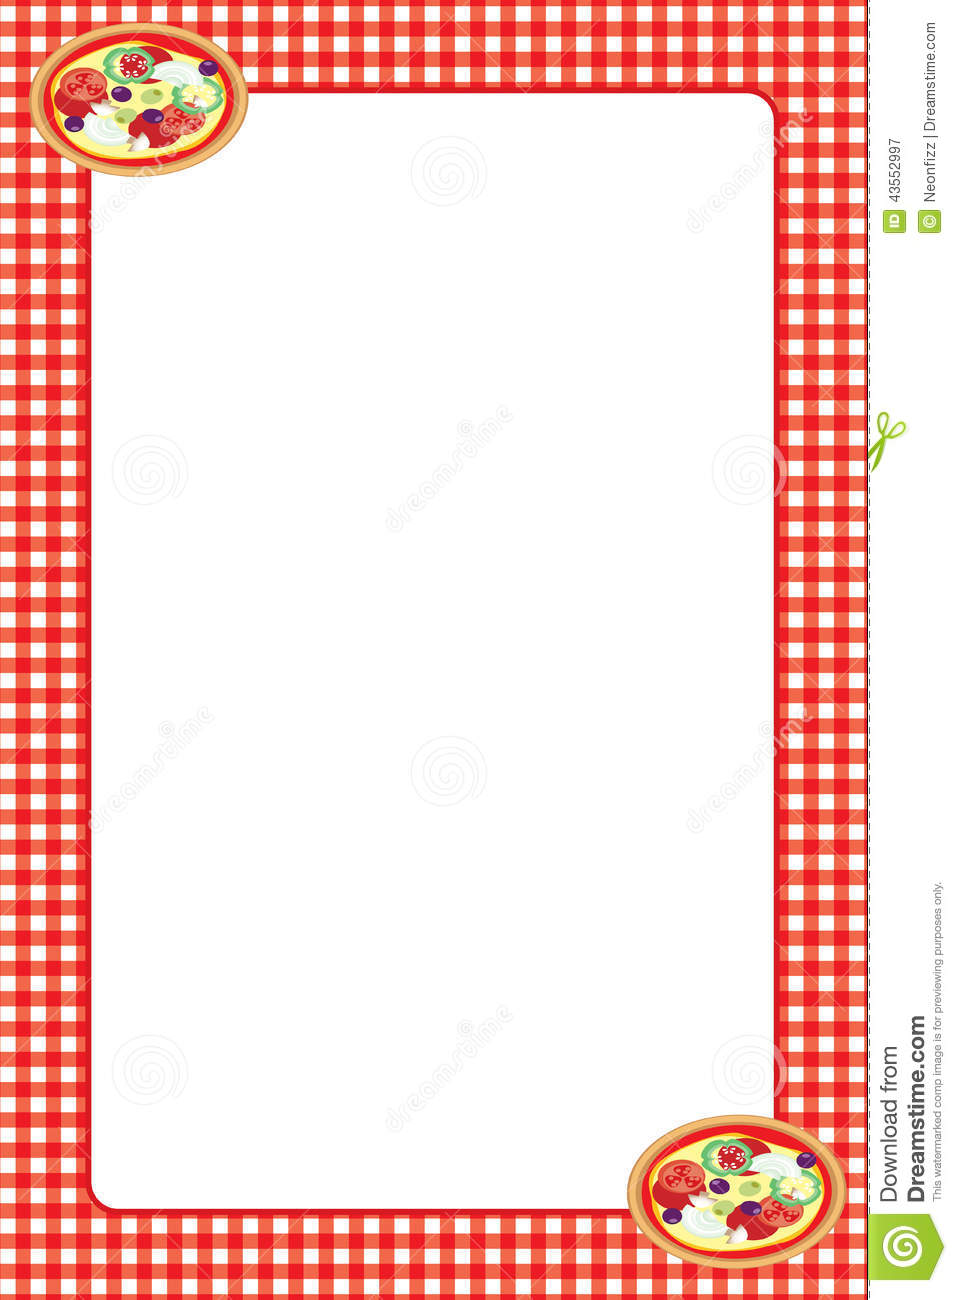 Illustrated Pizza Border Blank For Food Related Designs